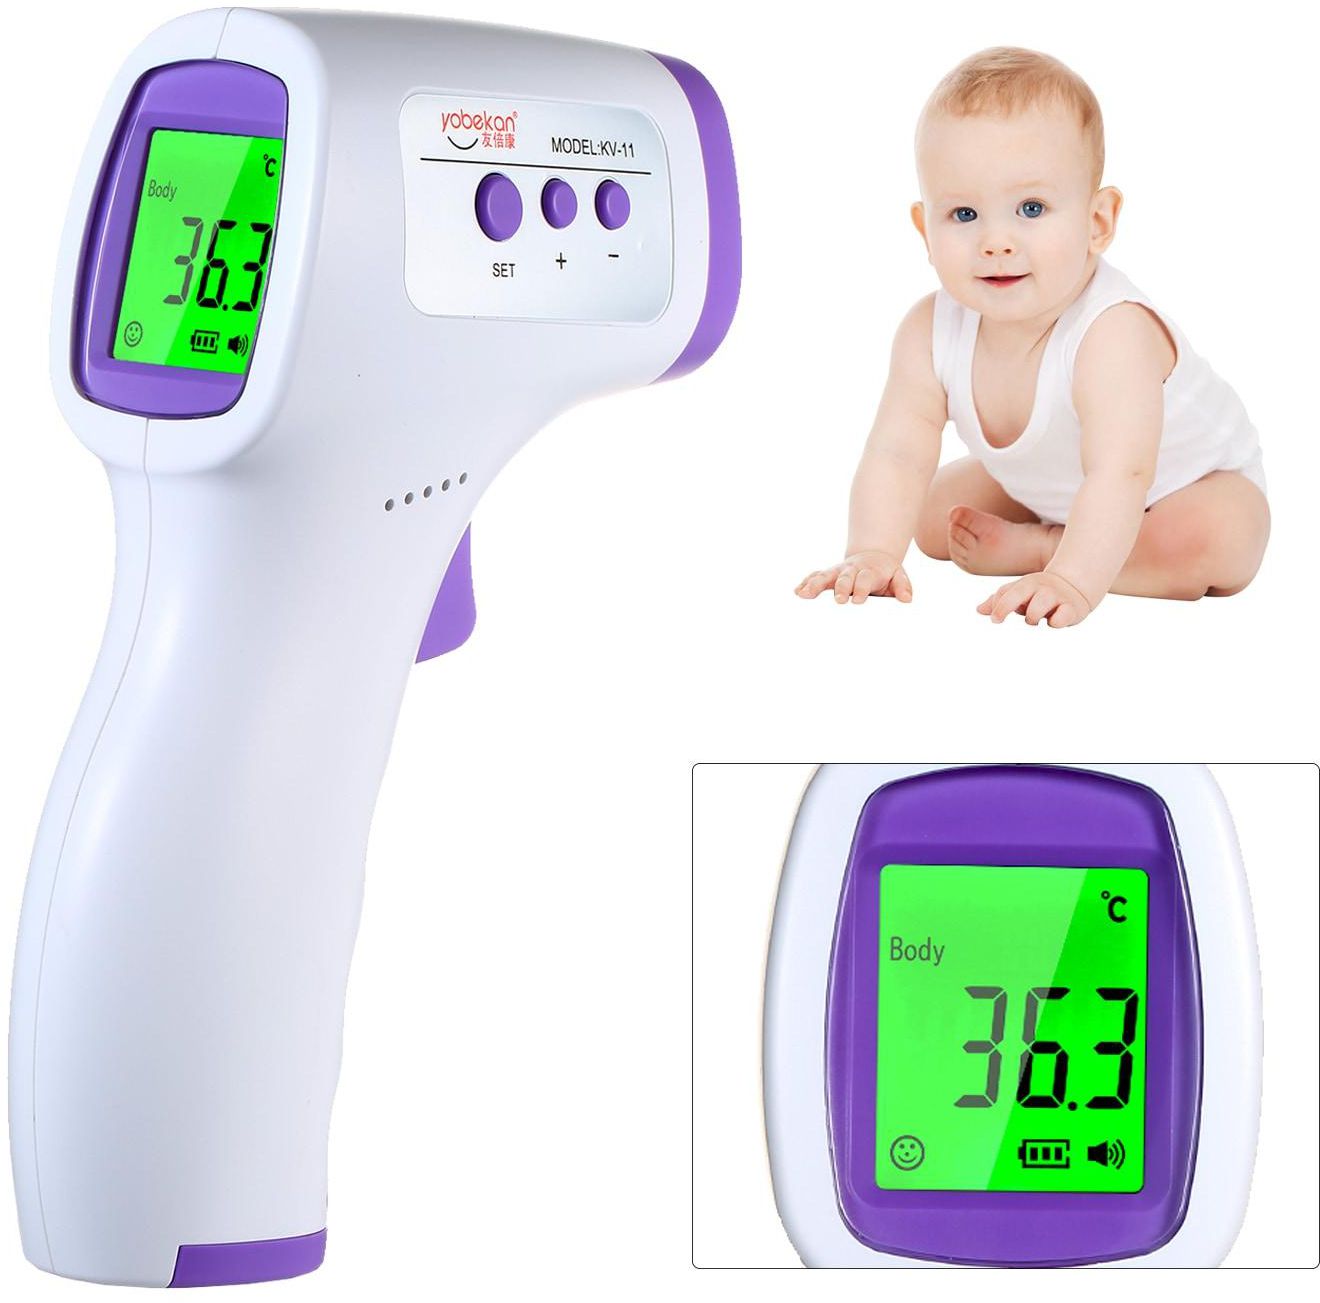 Generic-Digital Infrared Forehead Thermometer LCD IR Thermometer Handheld Non-contact IR Infrared Thermometer Temperature Meter with Fever Alarm for Children Adults Dual Temperature Mode 3-Color Backlight